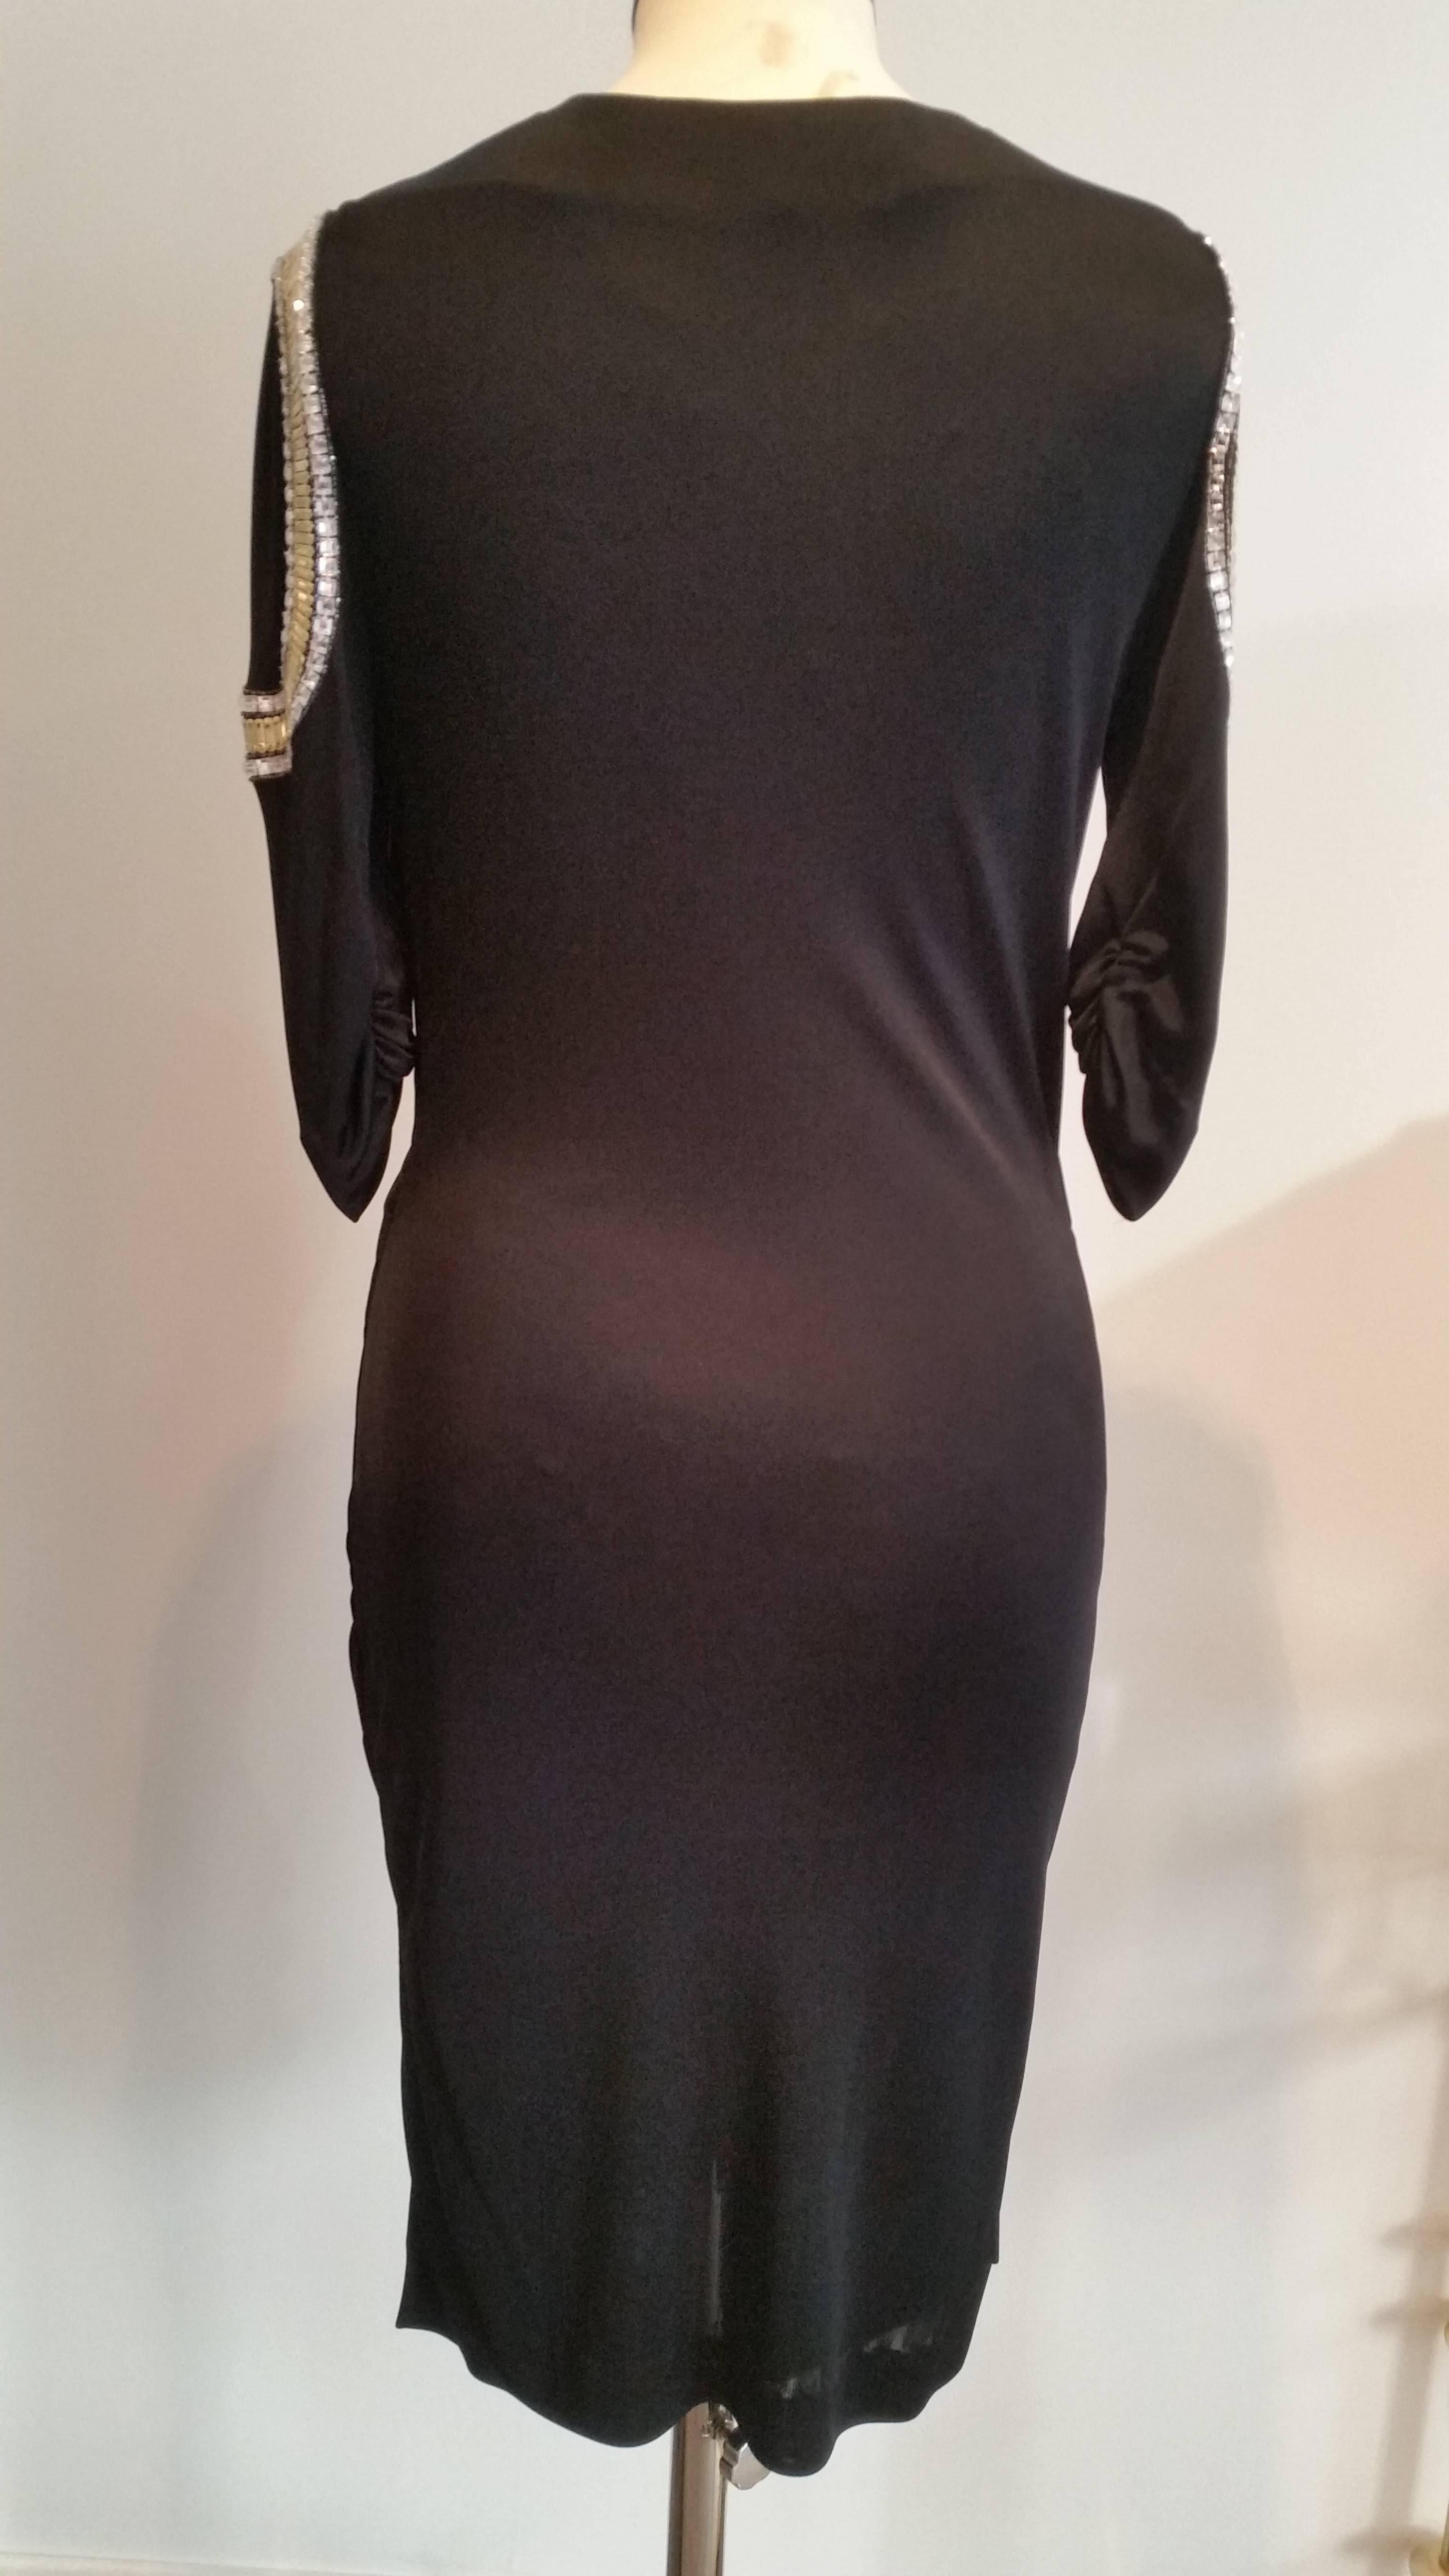 Women's Emilio Pucci Glamorous Black Dress with Crystal Shoulder Beading Detail For Sale